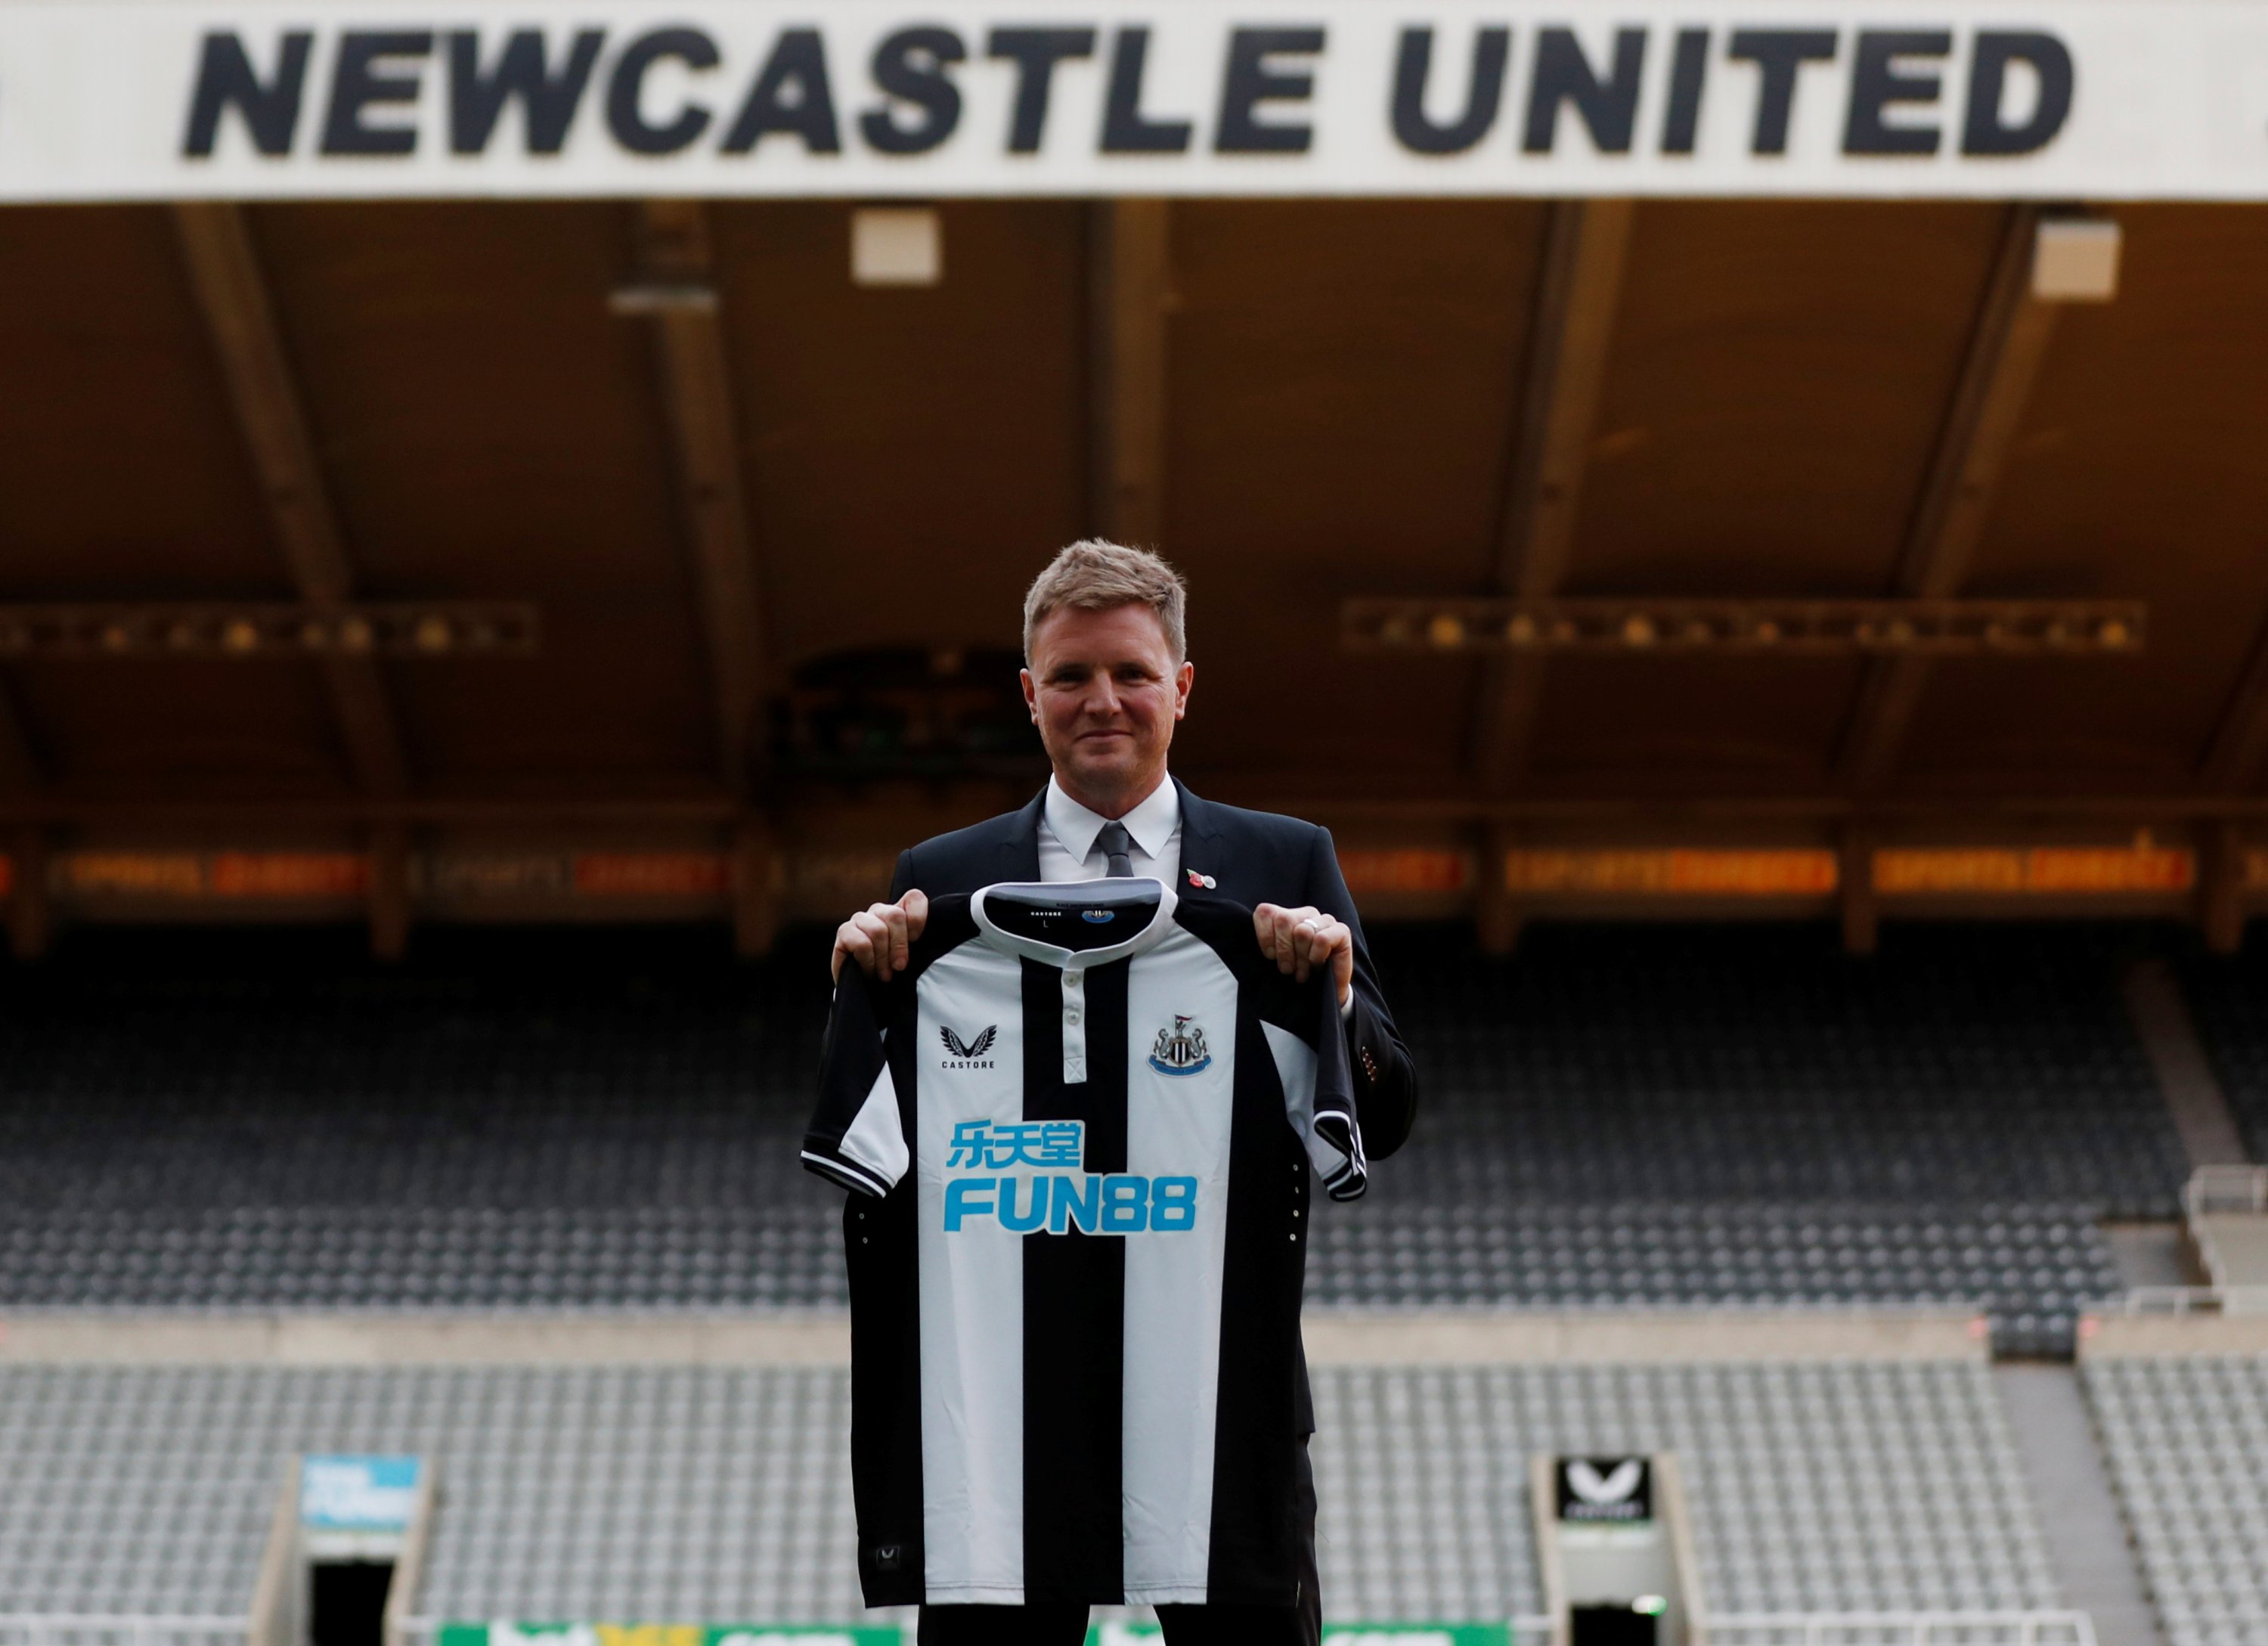 Newcastle manager Eddie Howe poses with a team shirt during the presentation at St James' Park, Newcastle, England, Nov. 10, 2021. (Reuters Photo)